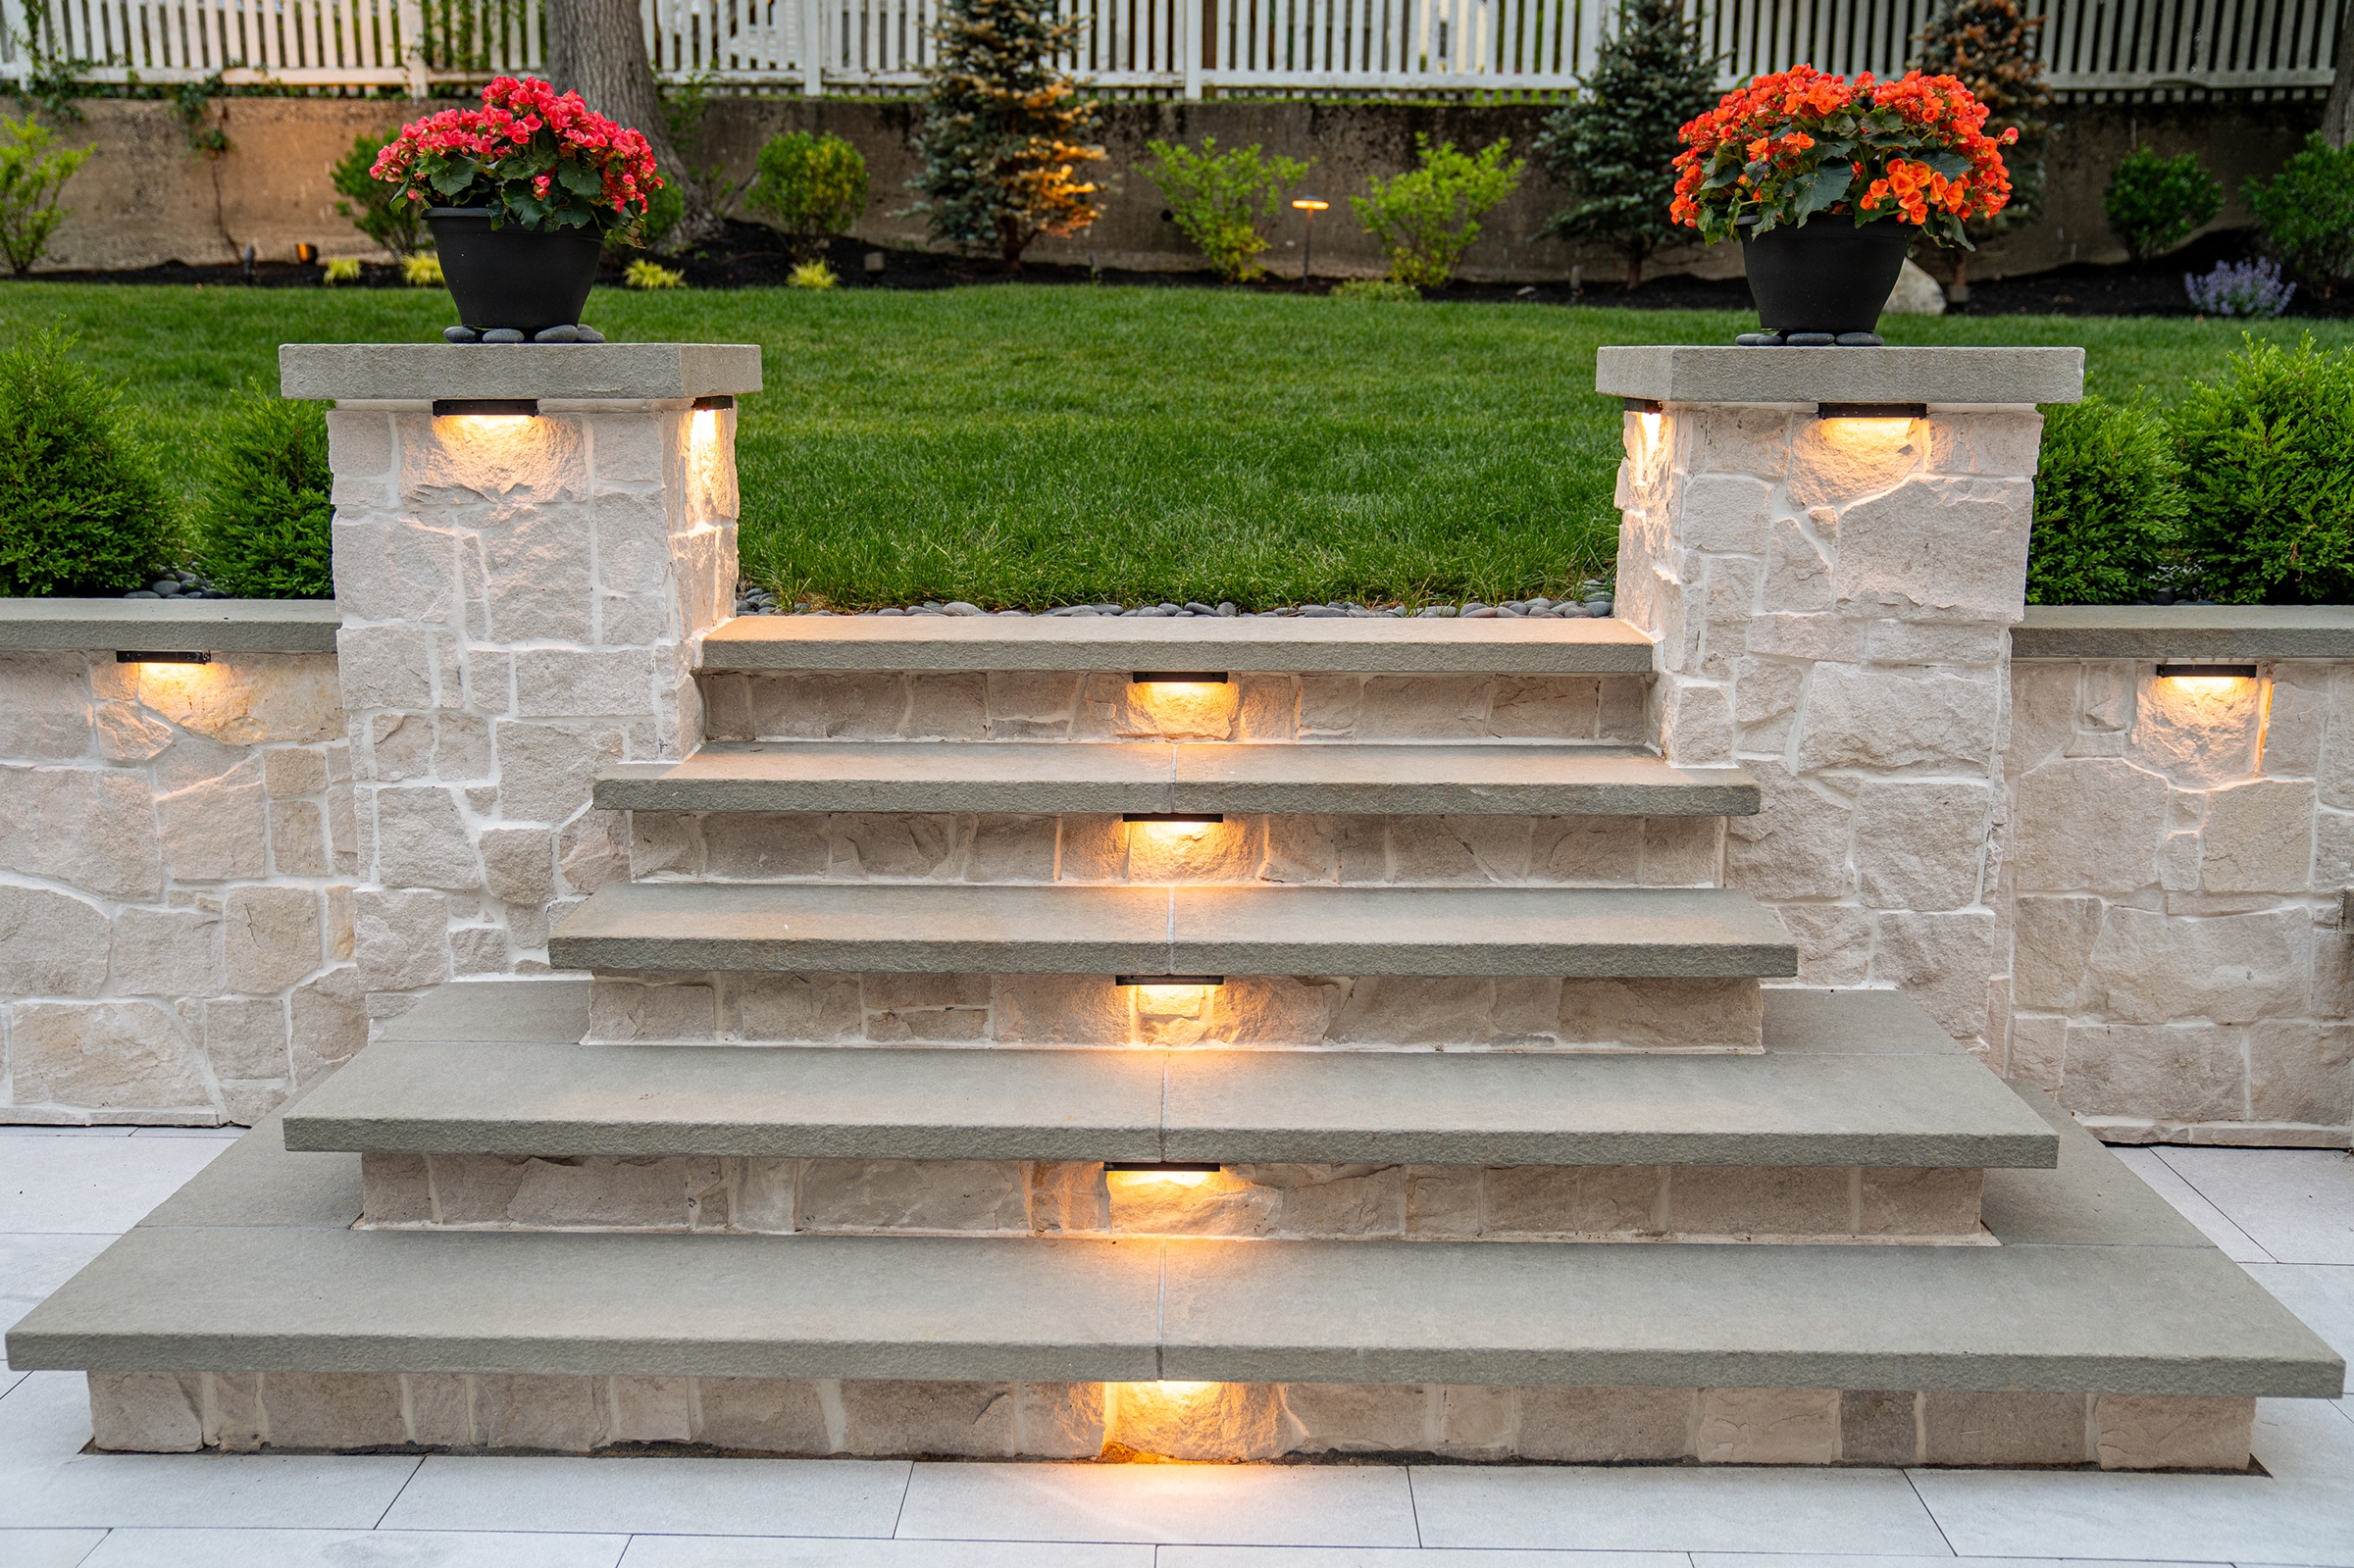 Stone steps with built-in low voltage landscape lighting in Needham, MA.